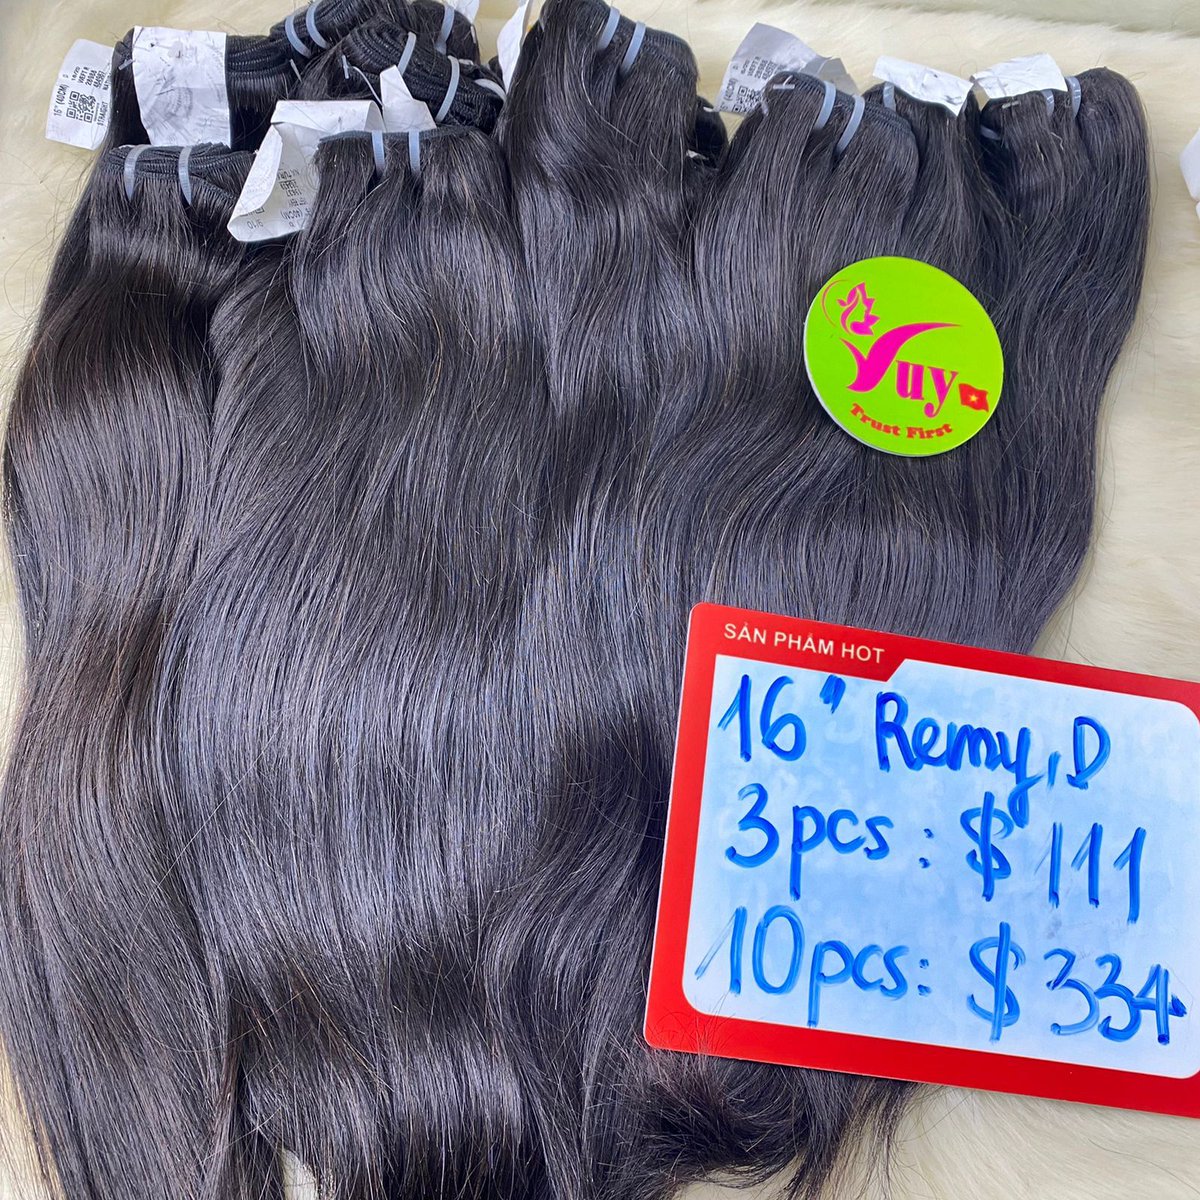 16” Straight From Remy Hair Extensions
Contact with me on Whatsapp
😍+84 396092128.
#minktresses #rawhairbundles #rawhair #hairboutique #dmvhair #bmorehair #indriahair #rawhairextensions #bundles #rawhairvendor #rawhairs #protectivestyles #rawhairwholesale #lacefront